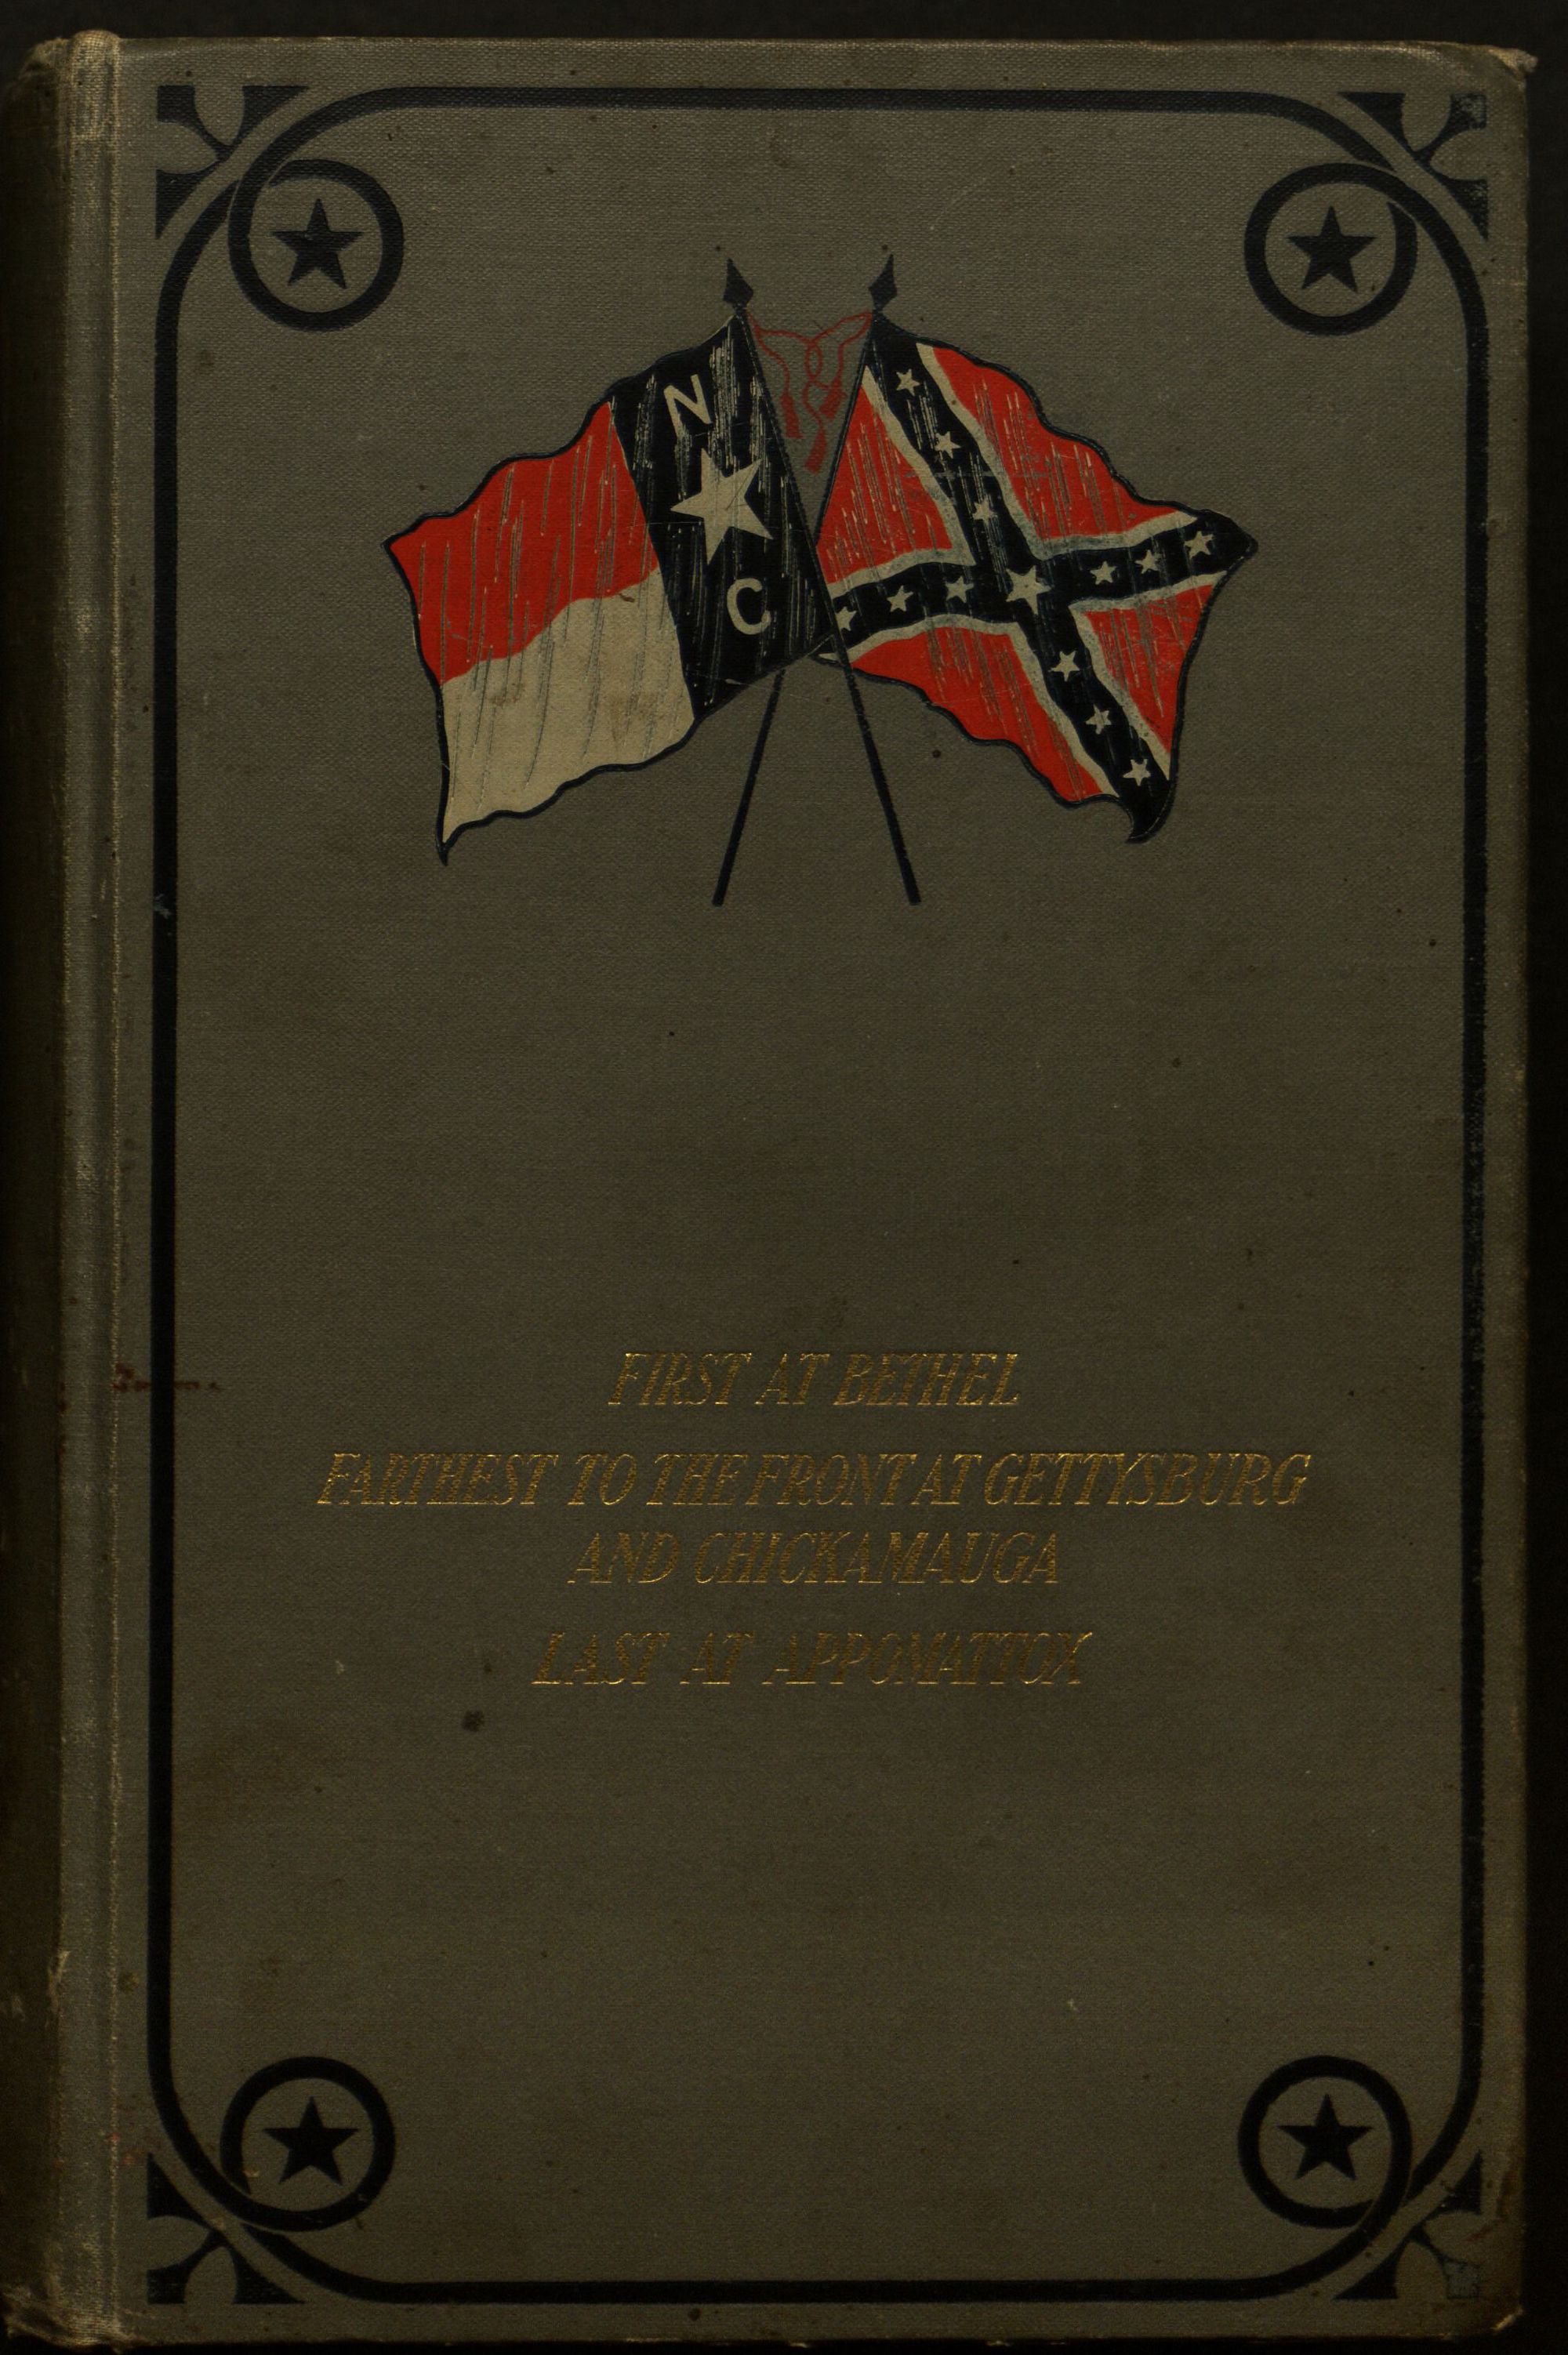 Histories of the several regiments and battalions from North Carolina, in the great war 1861-65 pic